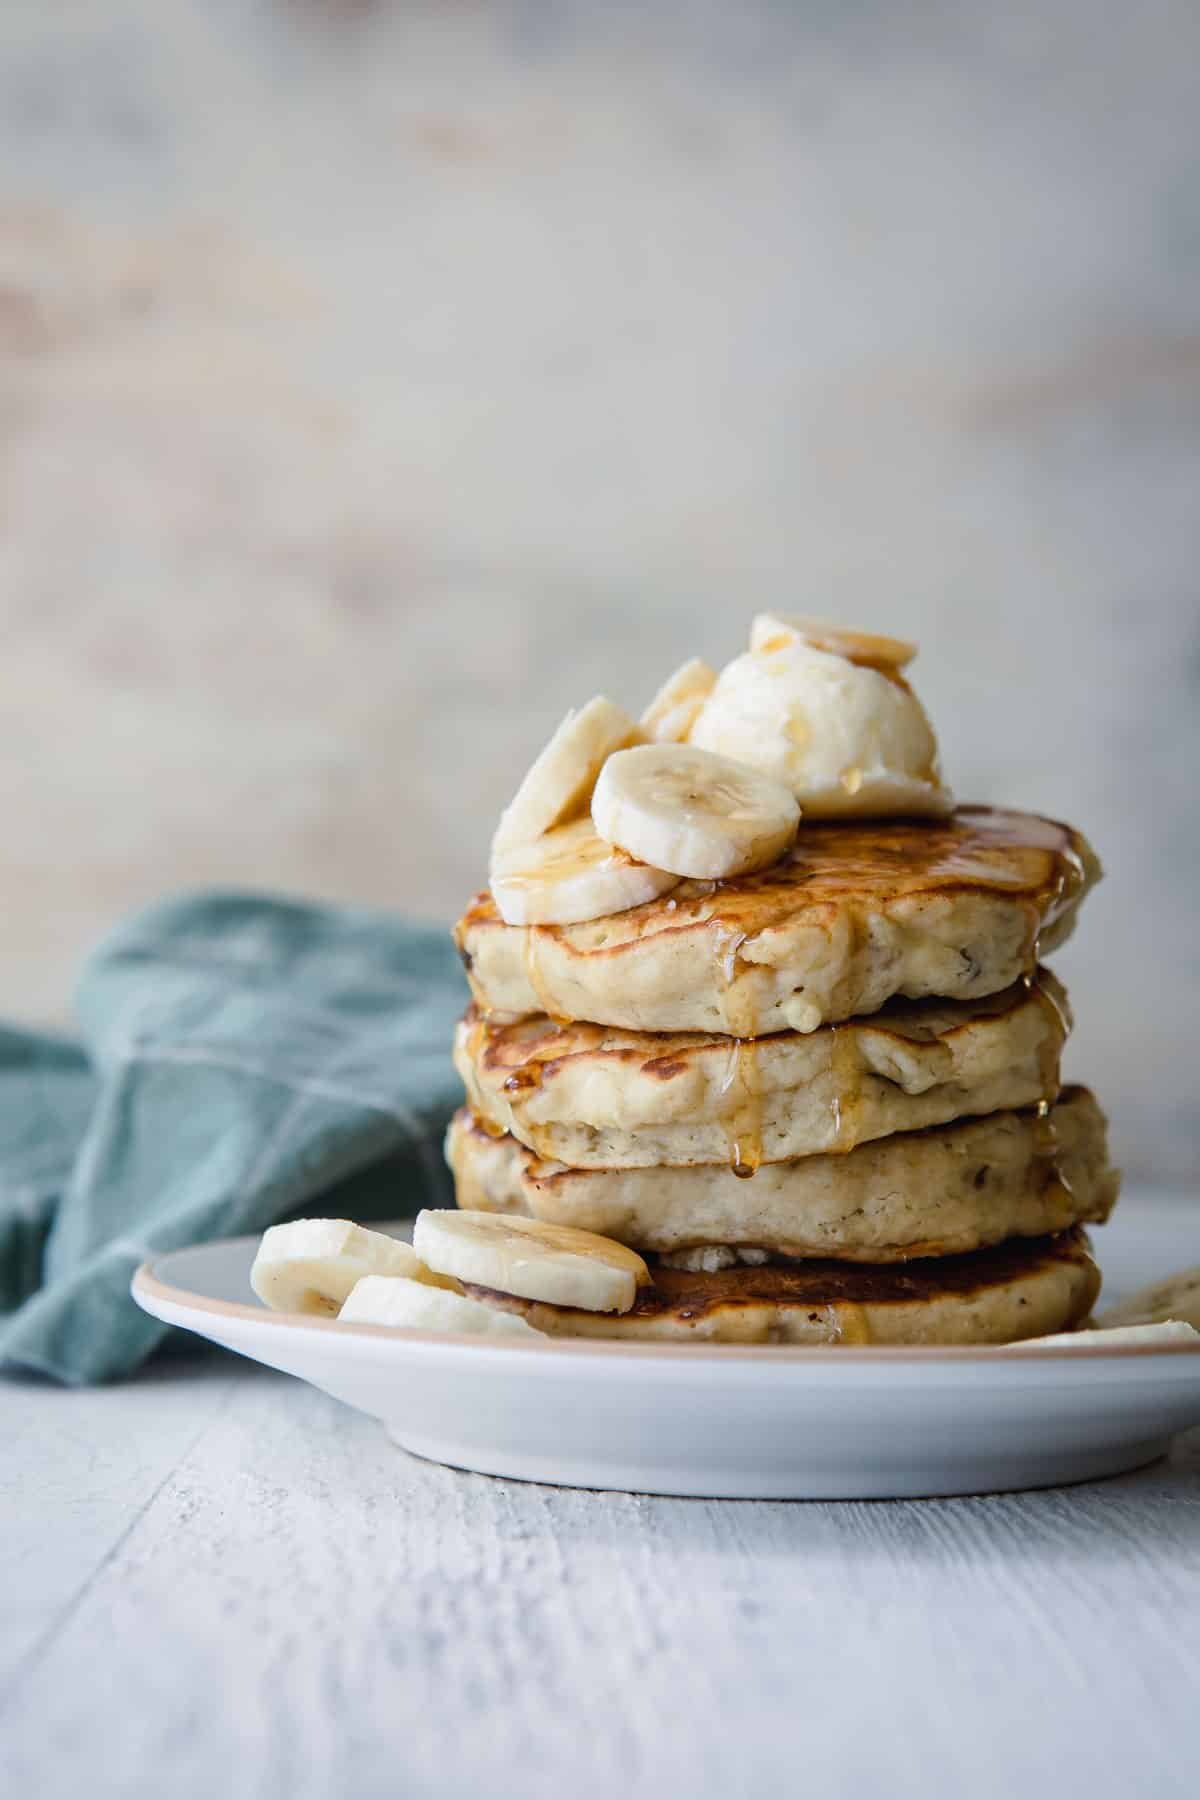 A stack of banana pancakes on a plate.